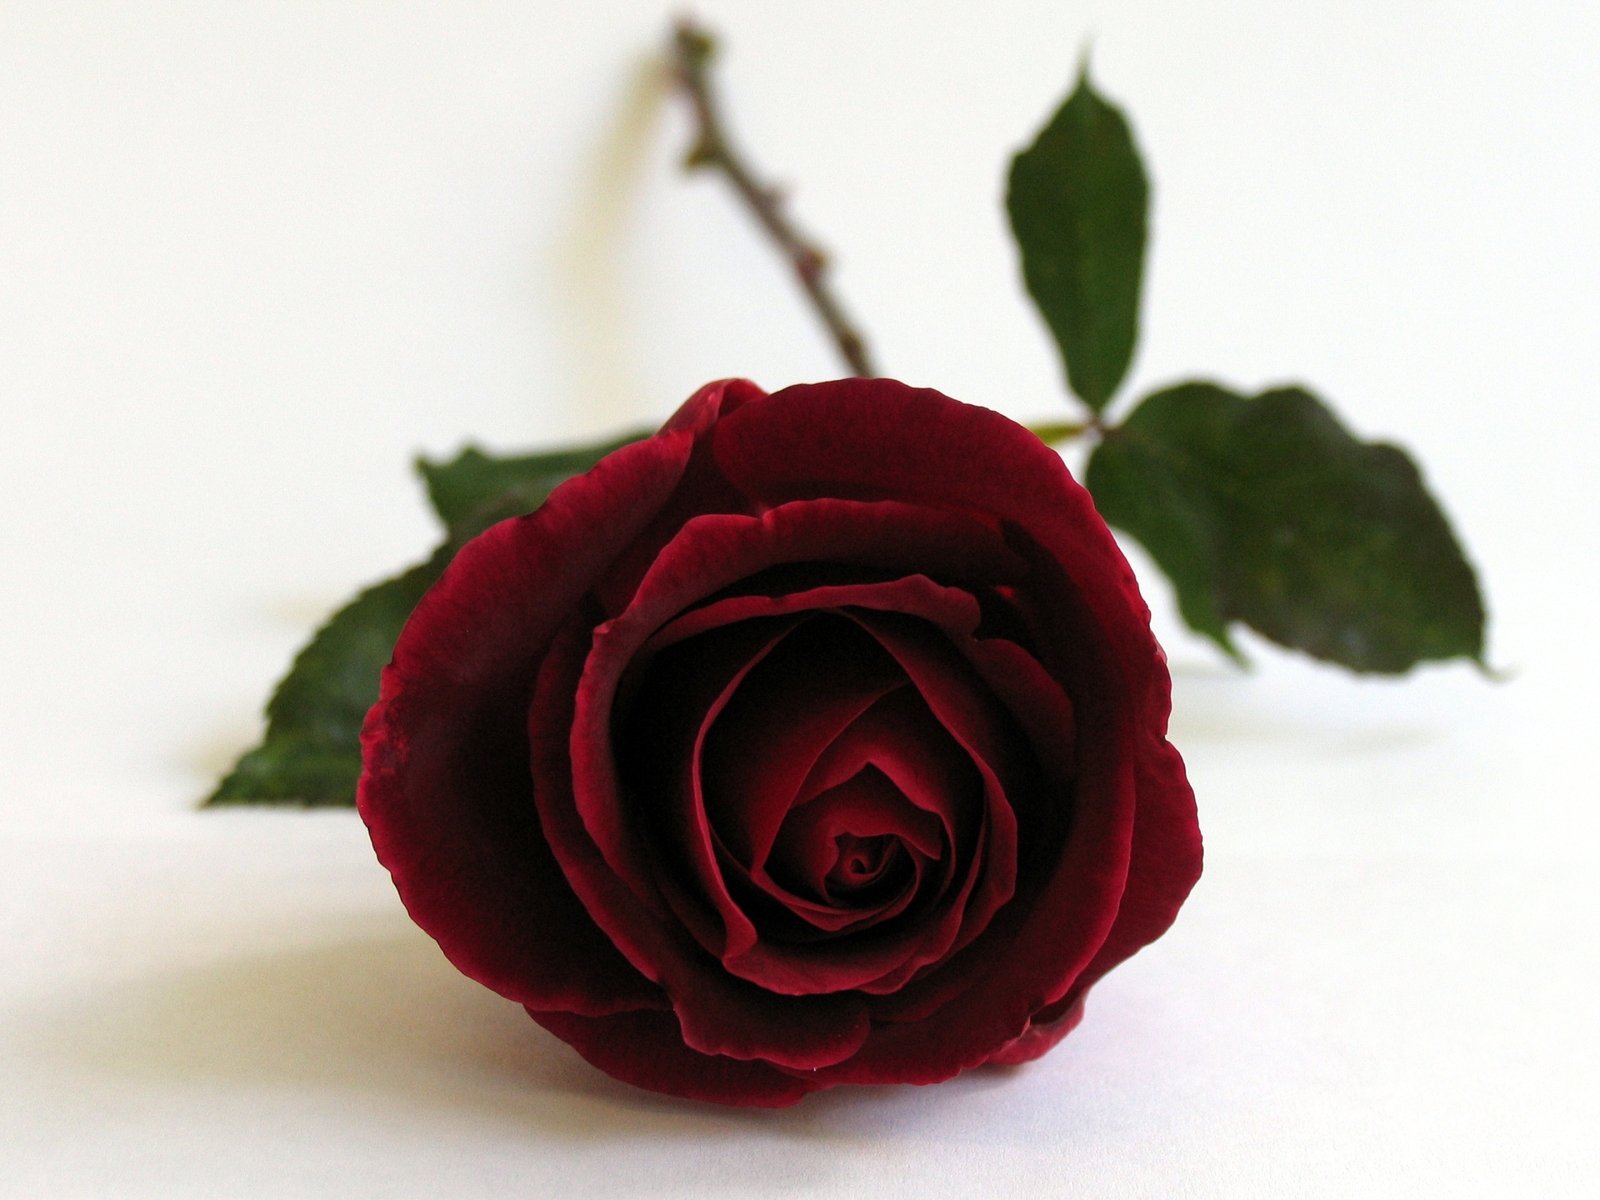 there is a large dark colored rose on a white surface